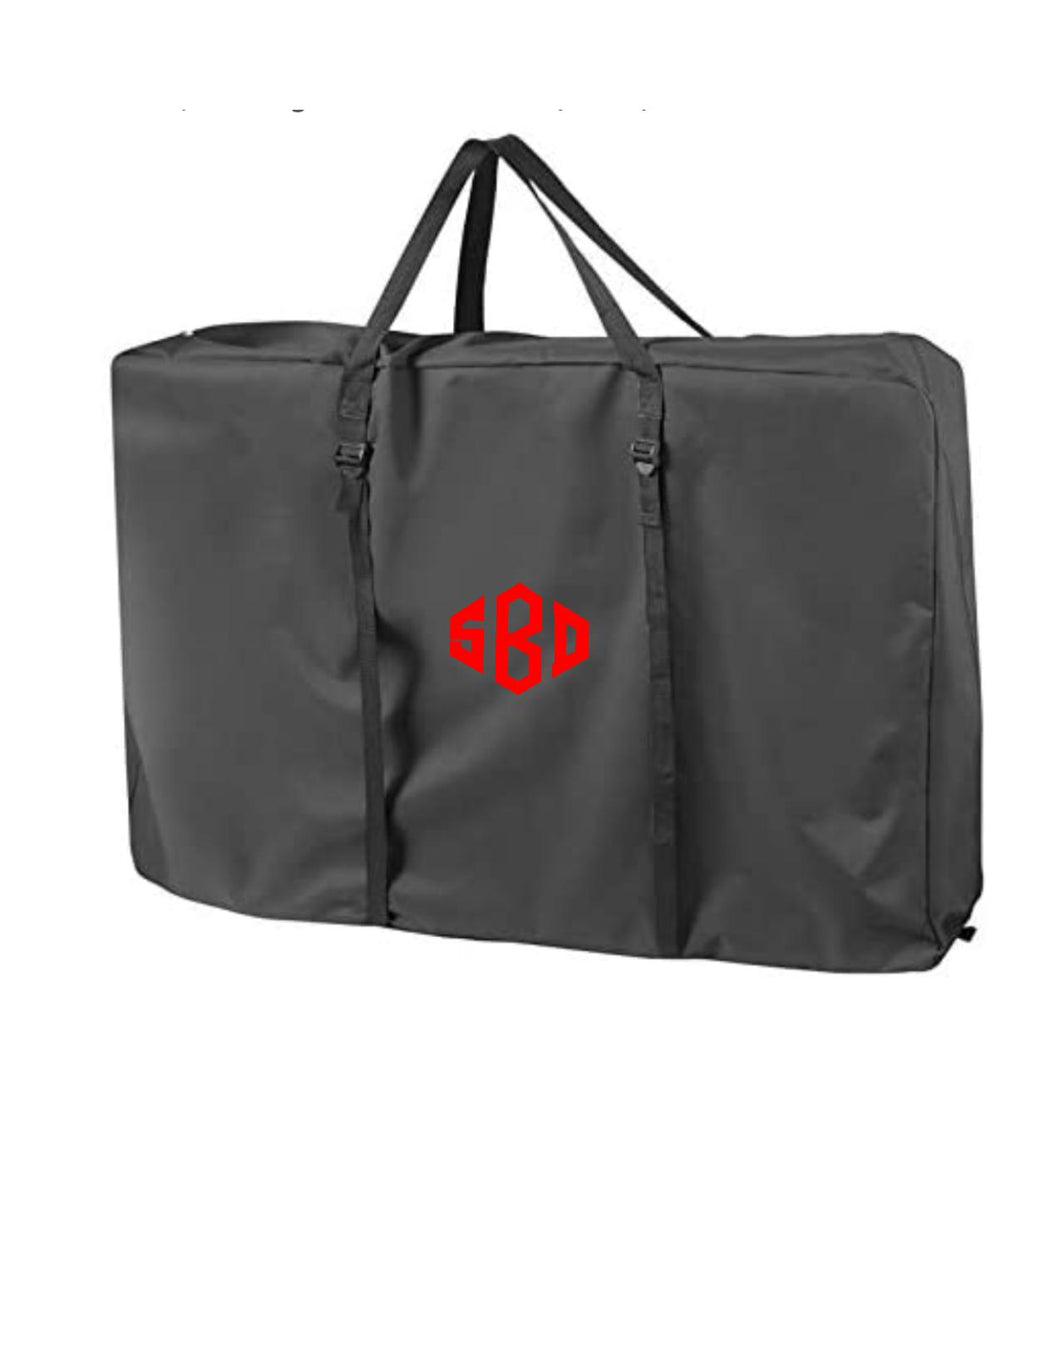 Directors Chair Carrying Bag with Diamond Monogram